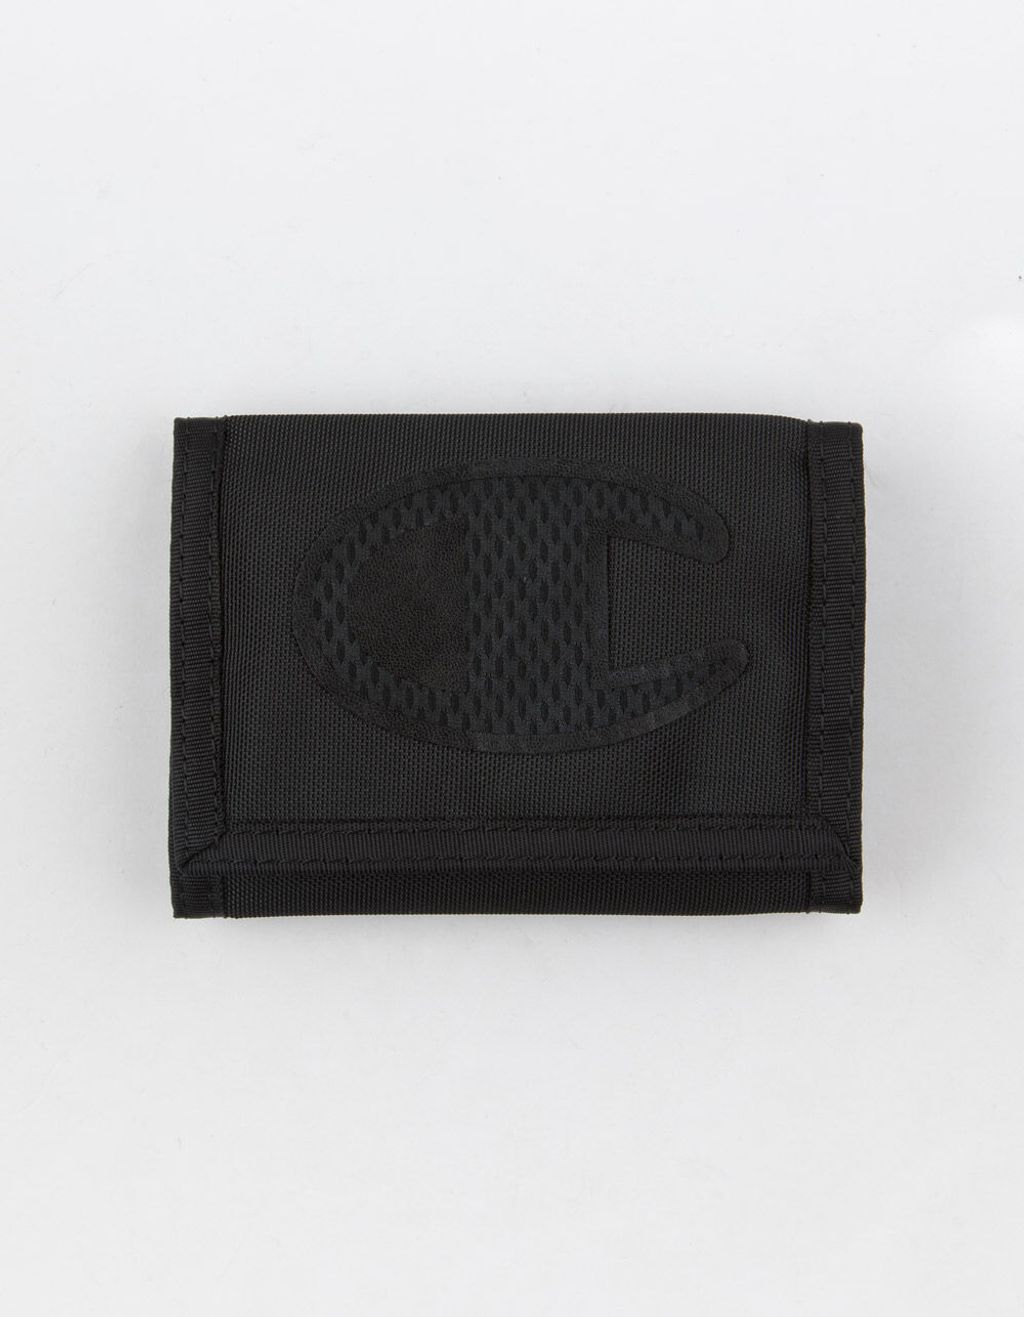 CHAMPION Trifold Wallet $25 to $10+tax